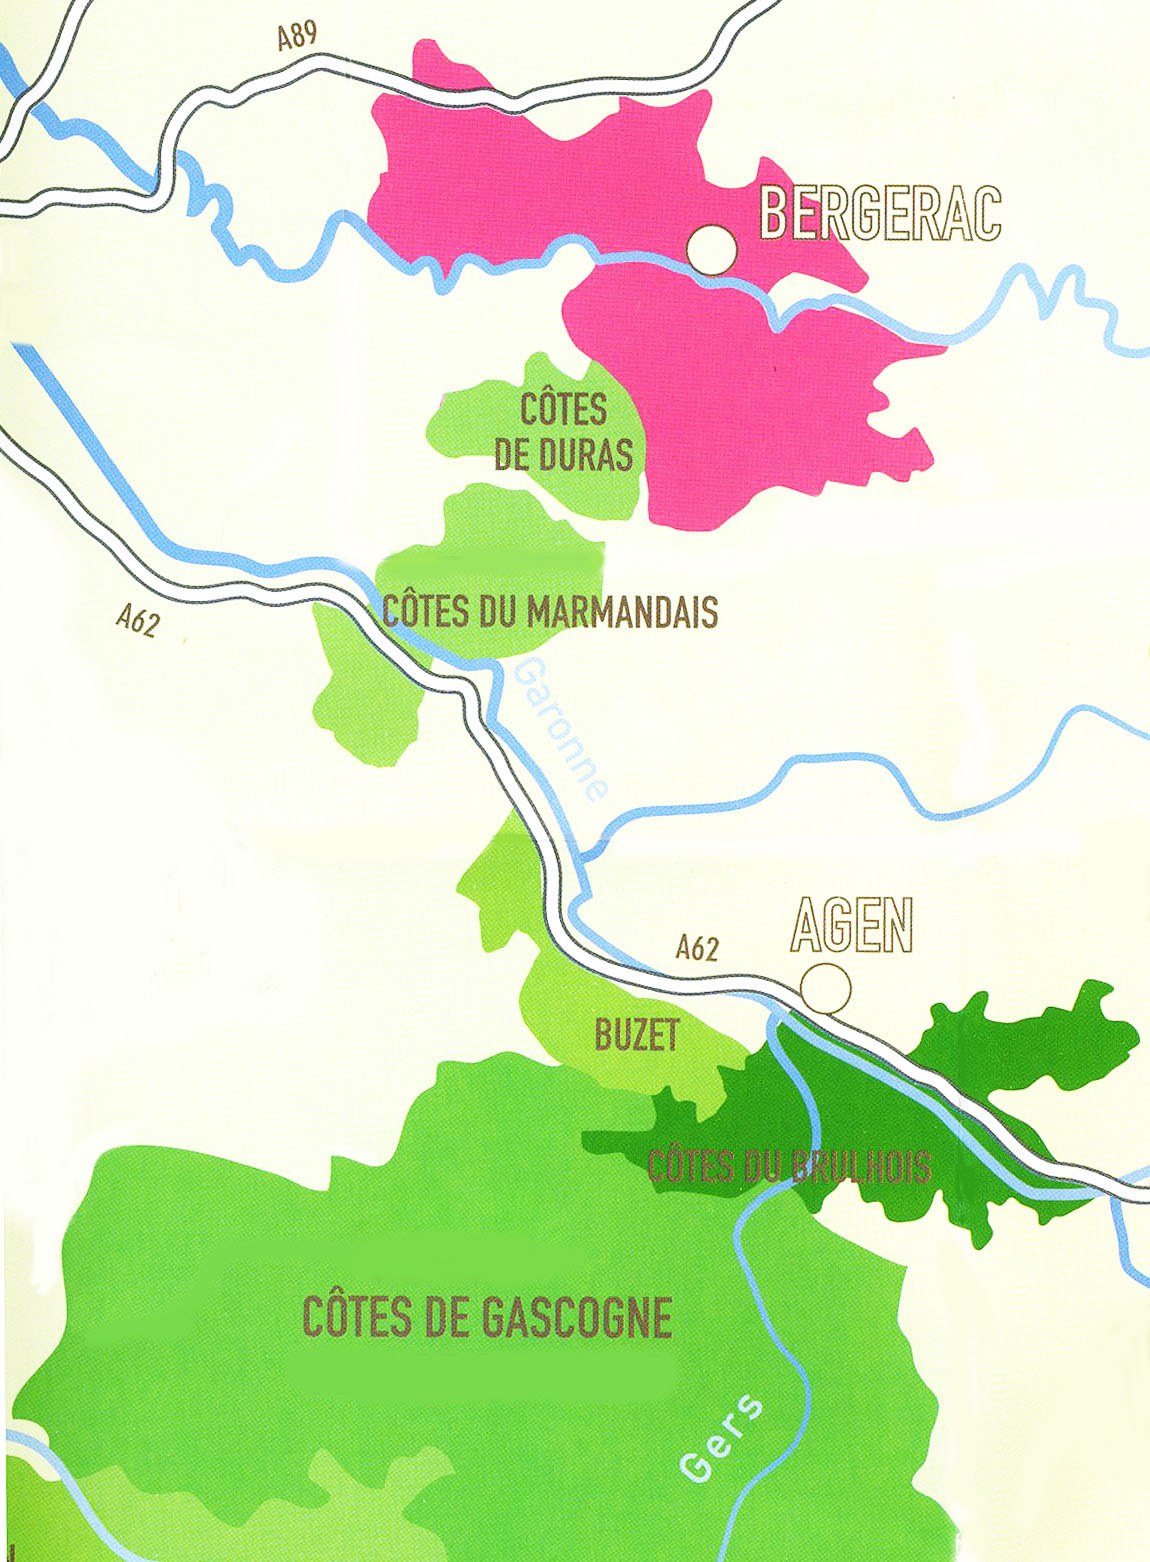 Beyond Bordeaux Satellites: - Bergerac Gascony GuildSomm Neal - From Feature Charles - Articles International to